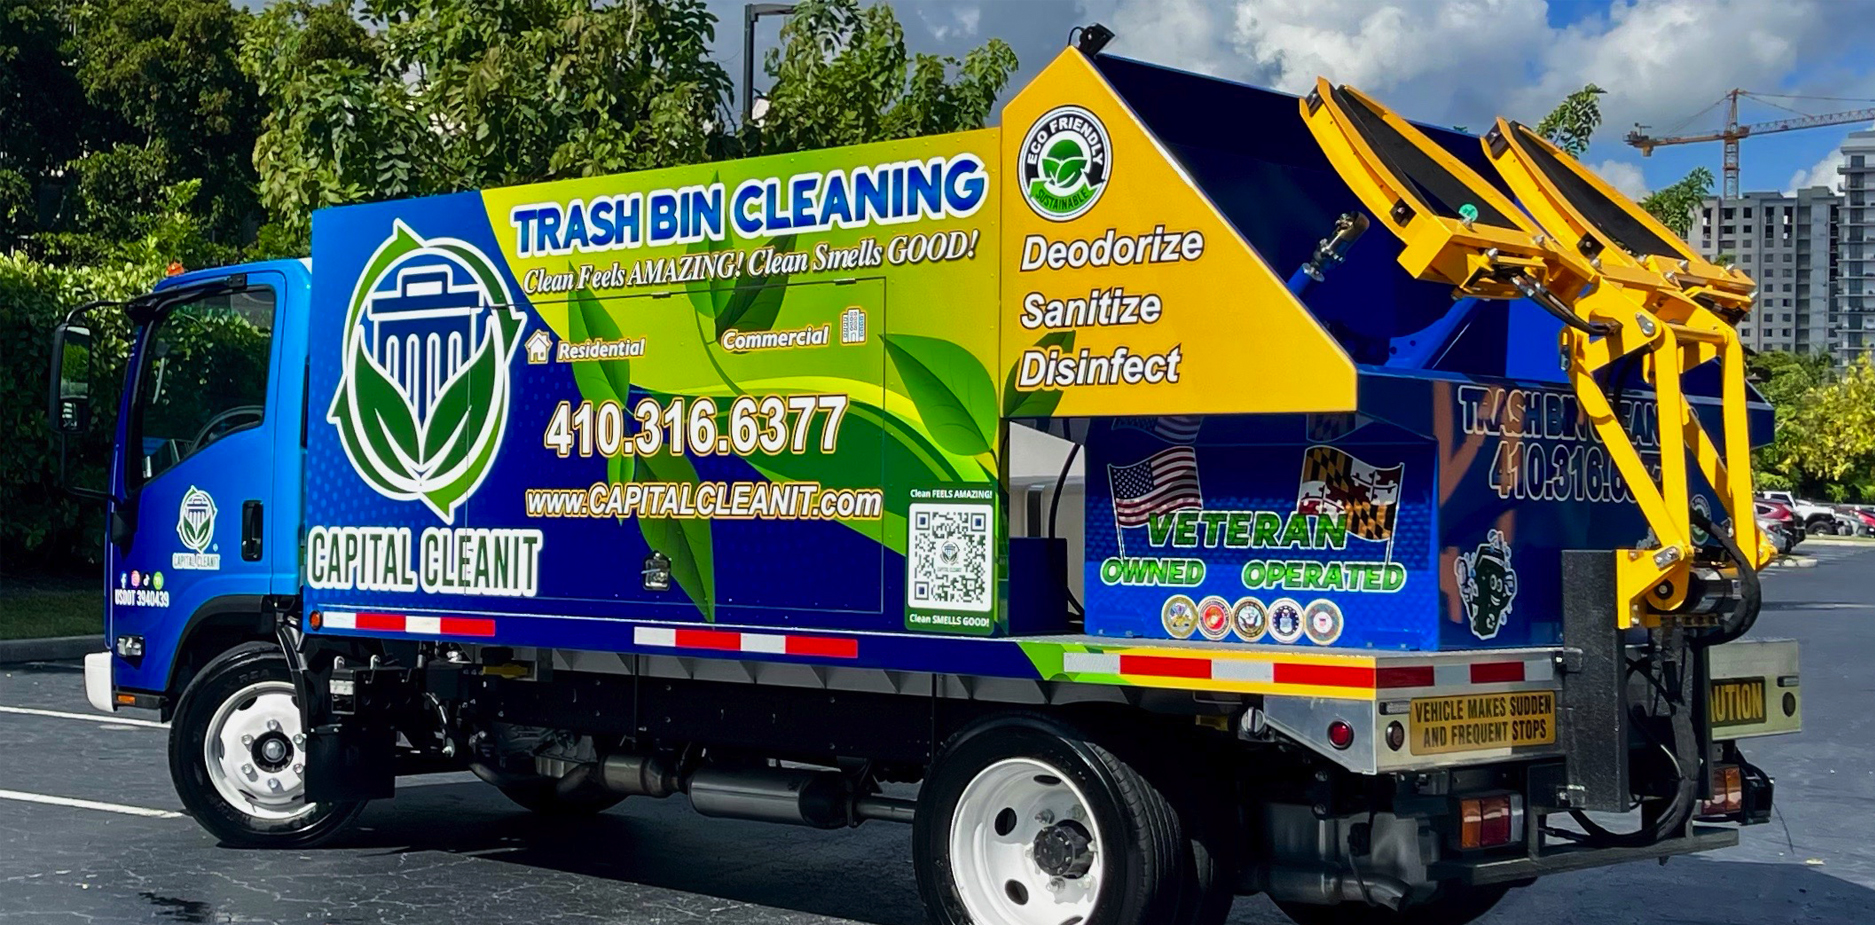 CAPITAL CLEANIT TRASH BIN CLEANING SERVICES